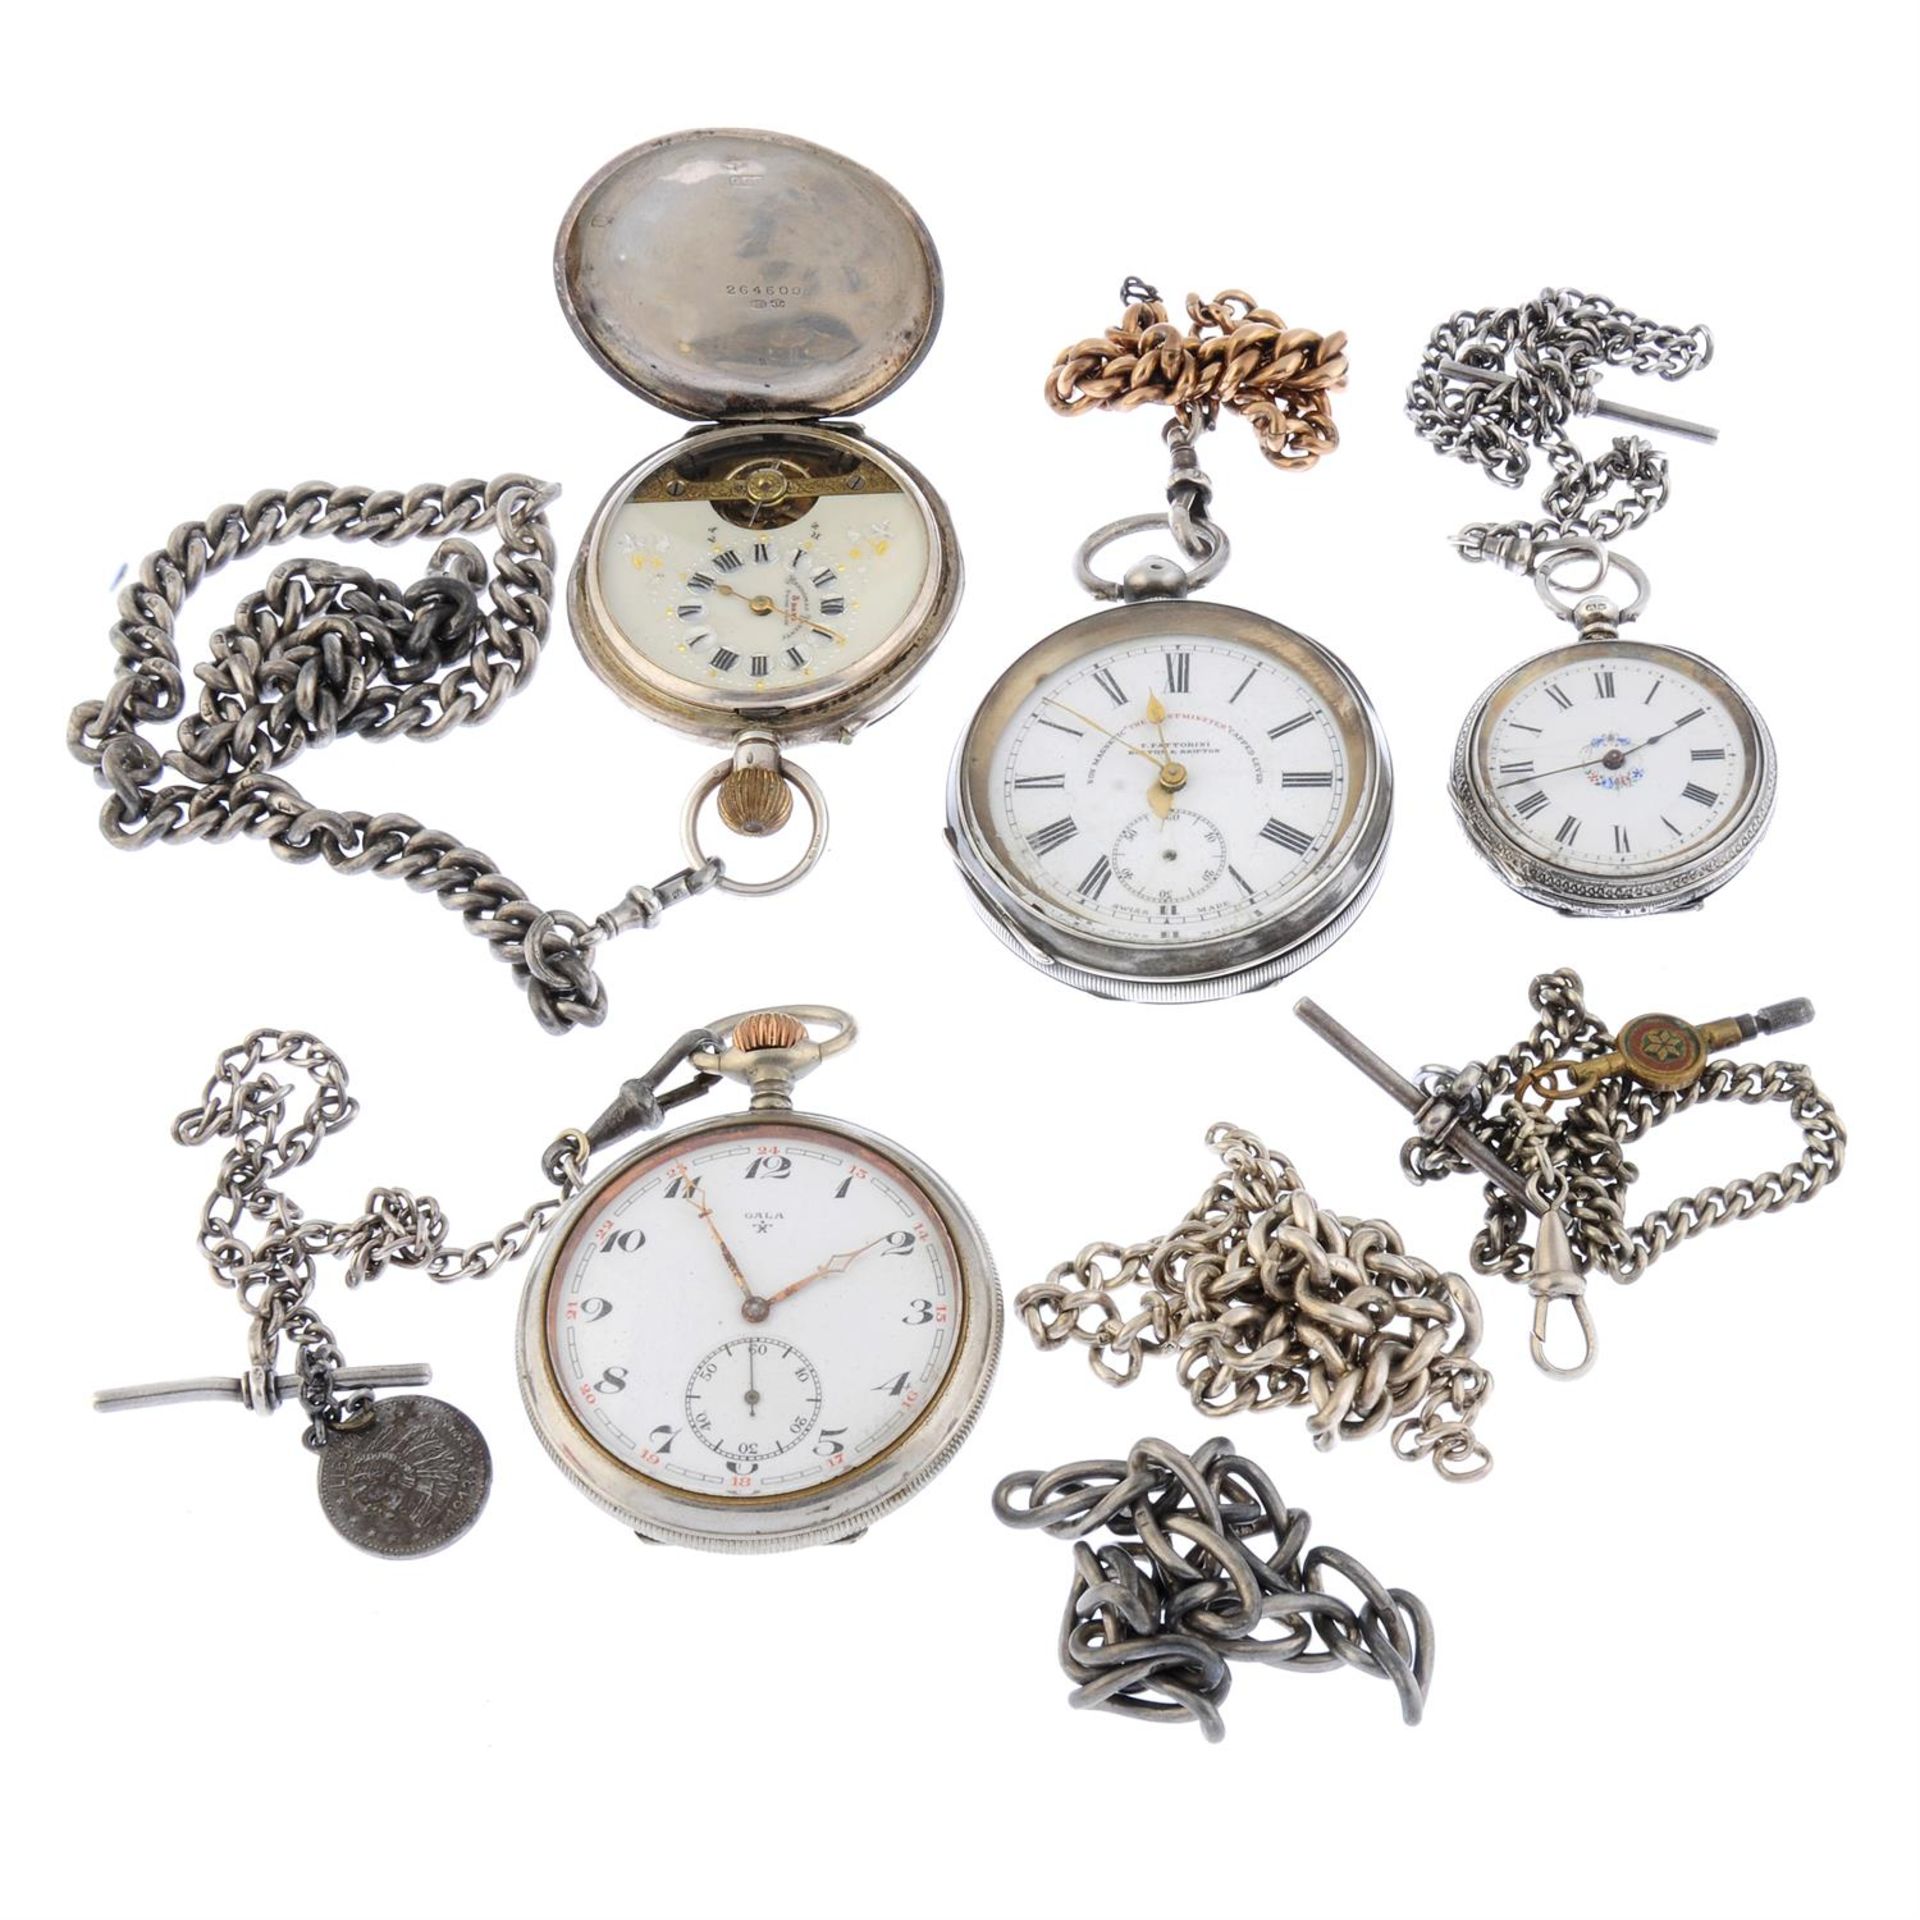 A group of four pocket watches.